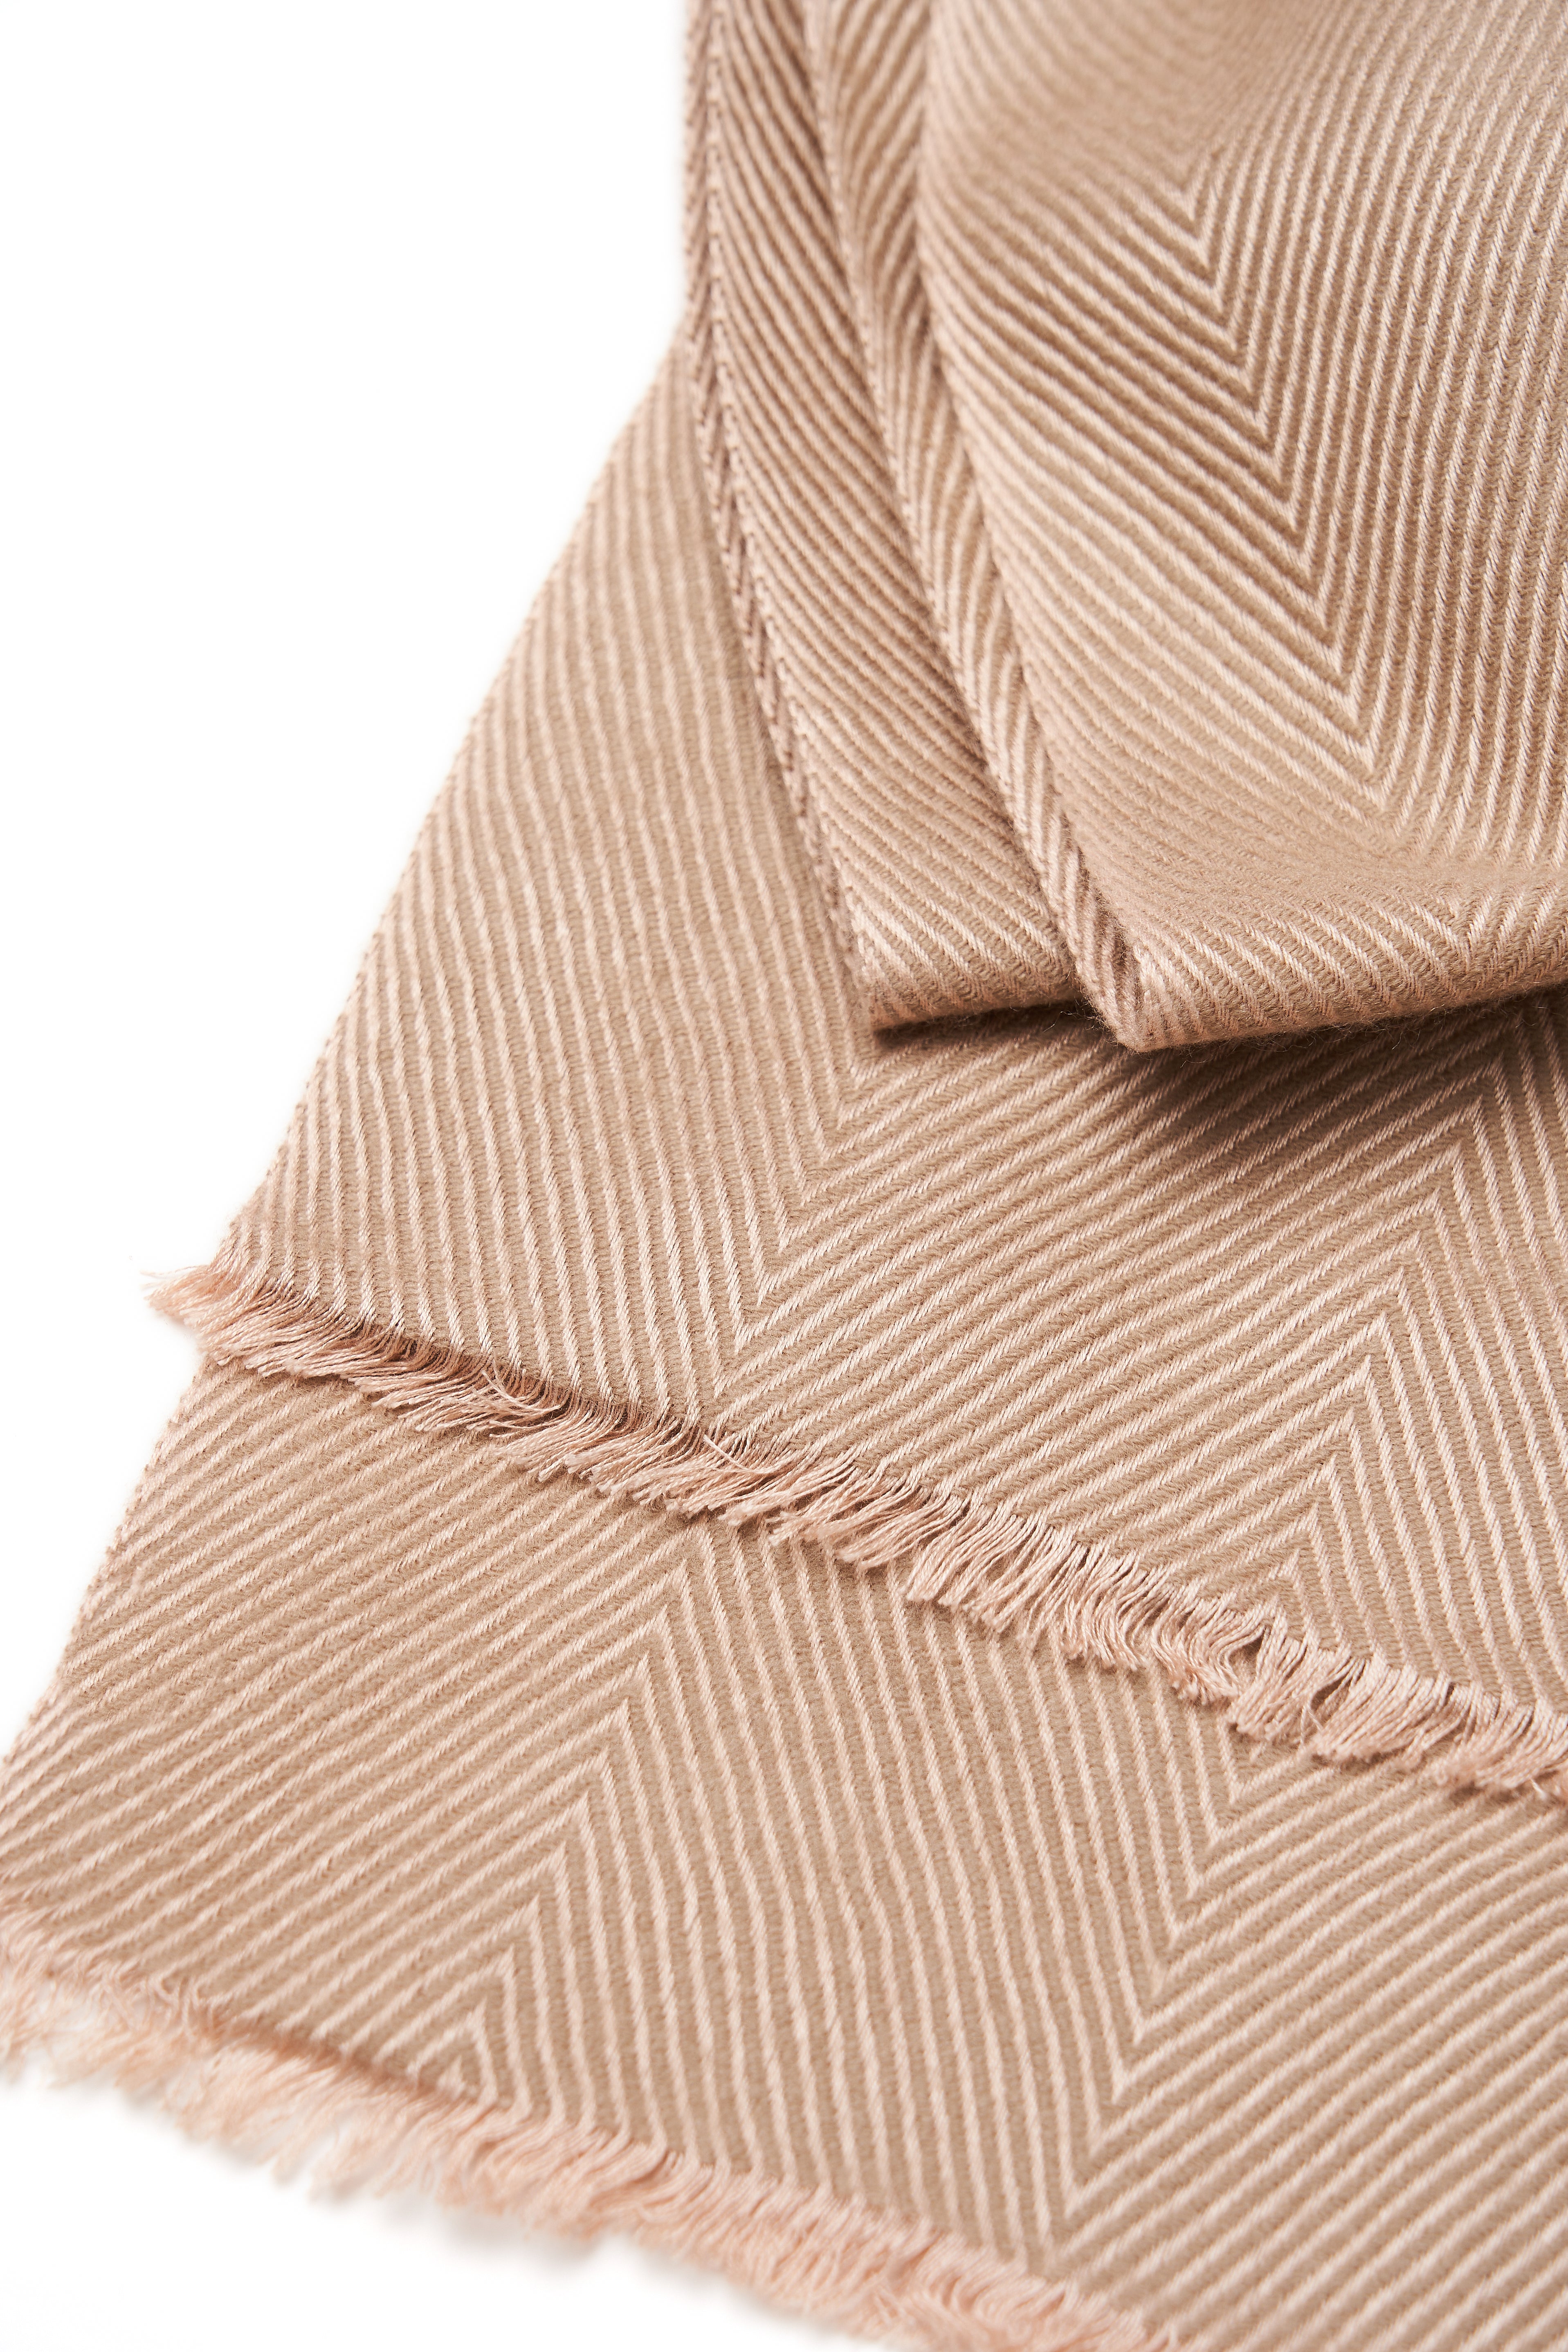 TEXTURED FABRIC CAMEL SCARF